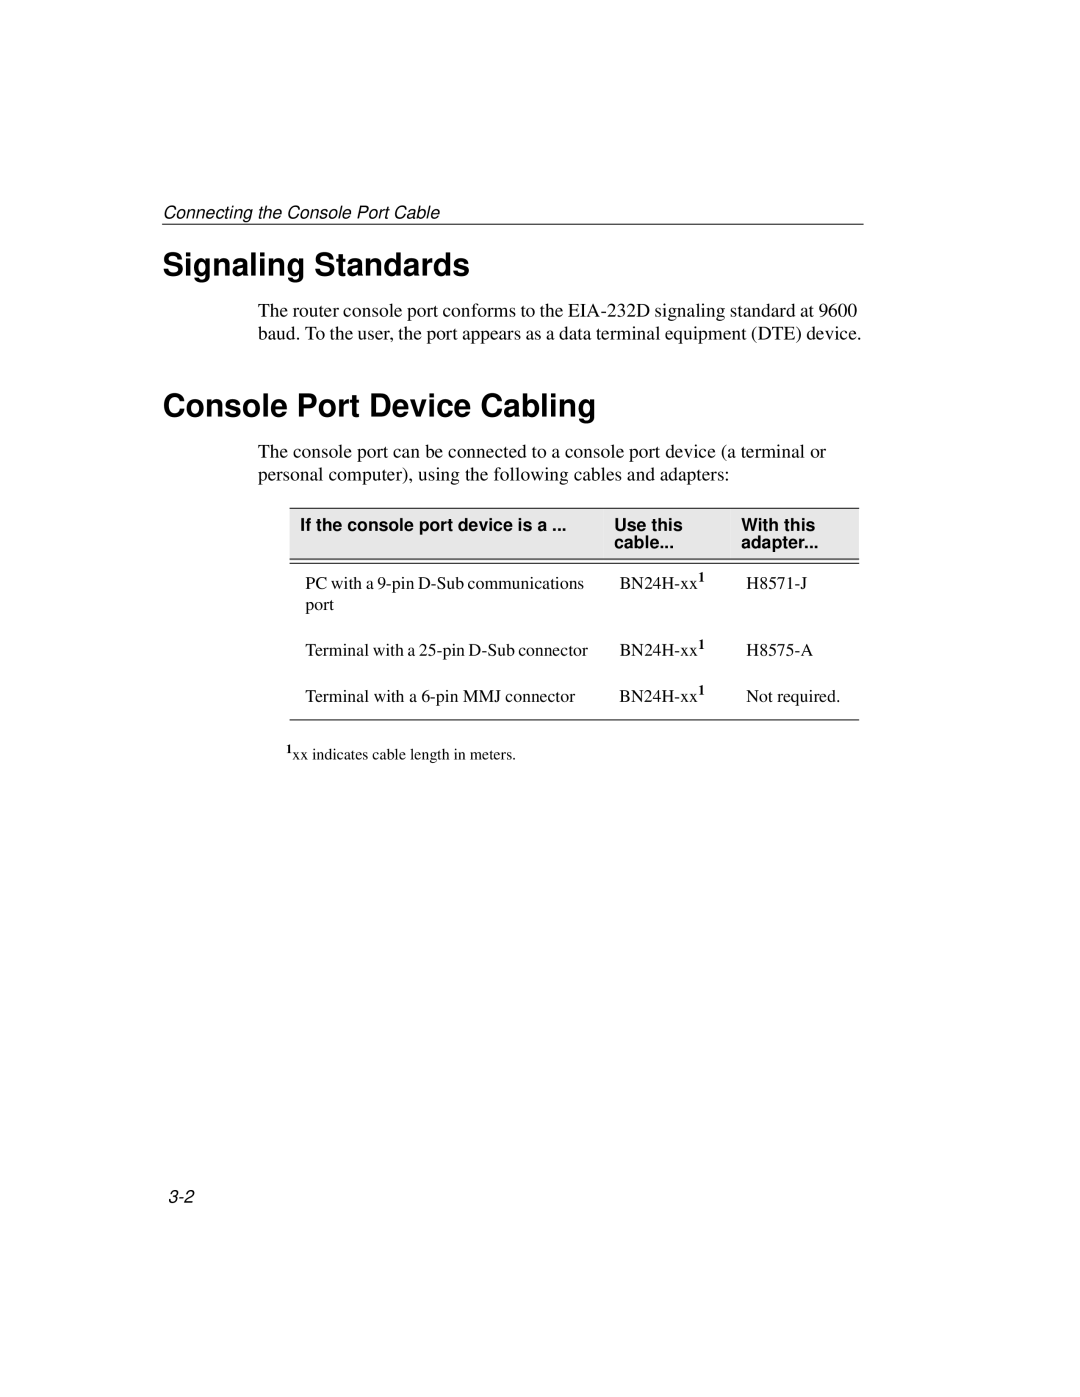 Cabletron Systems 510, 520 manual Signaling Standards, Console Port Device Cabling 